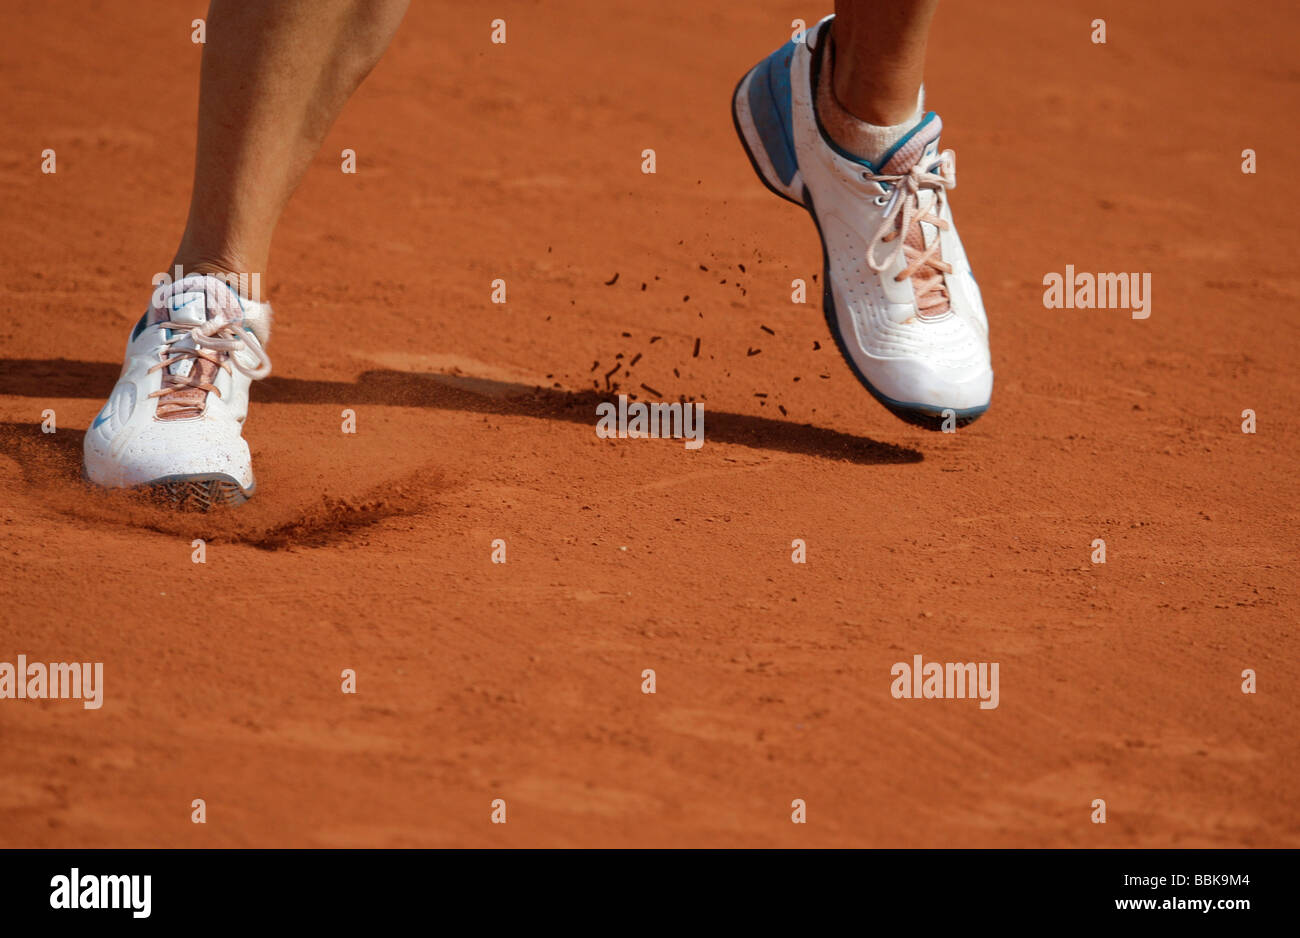 Tennis player Maria Sharapova's feet in her personalized shoes. Stock Photo